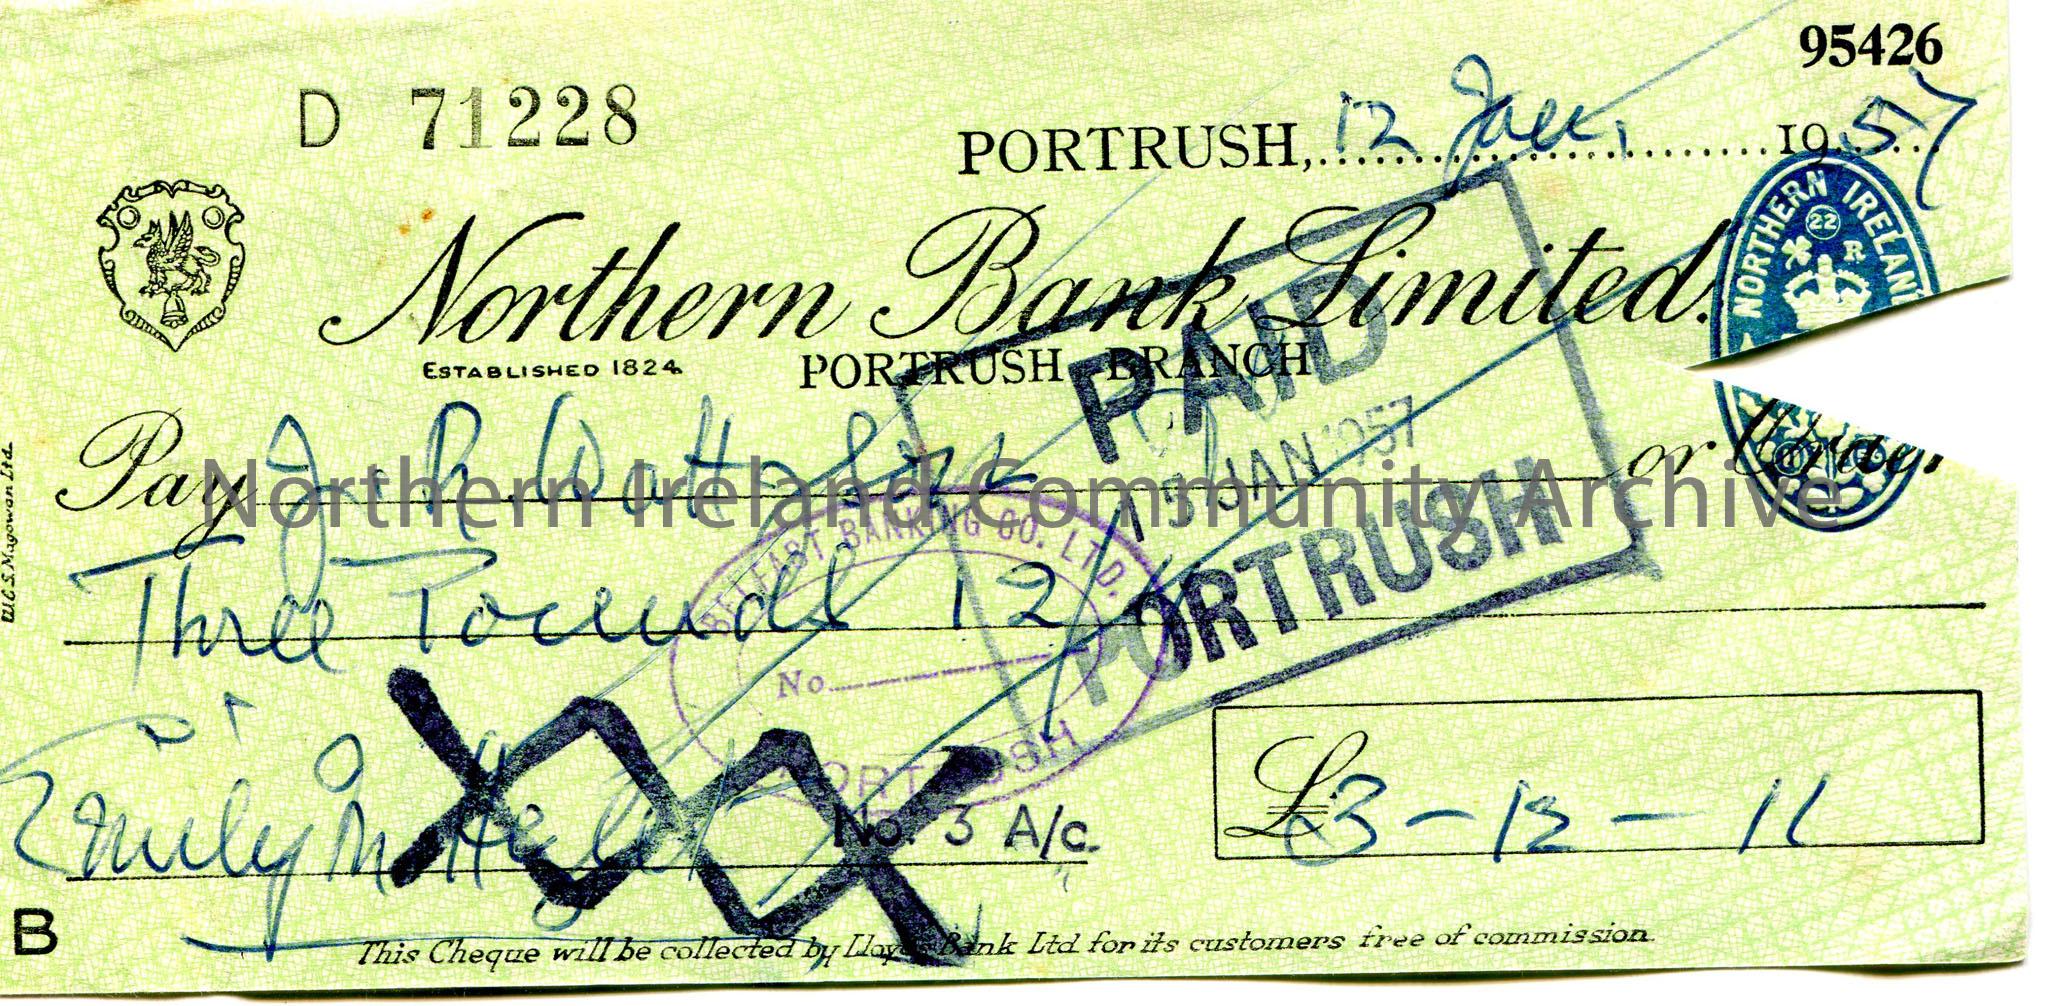 Handwritten Northern Bank Limited, Portrush branch cheque, no 71228. Payable to J. R. Watt & Son from Emily M. Hezlet for £3.12.11. Dated 12th Ja…